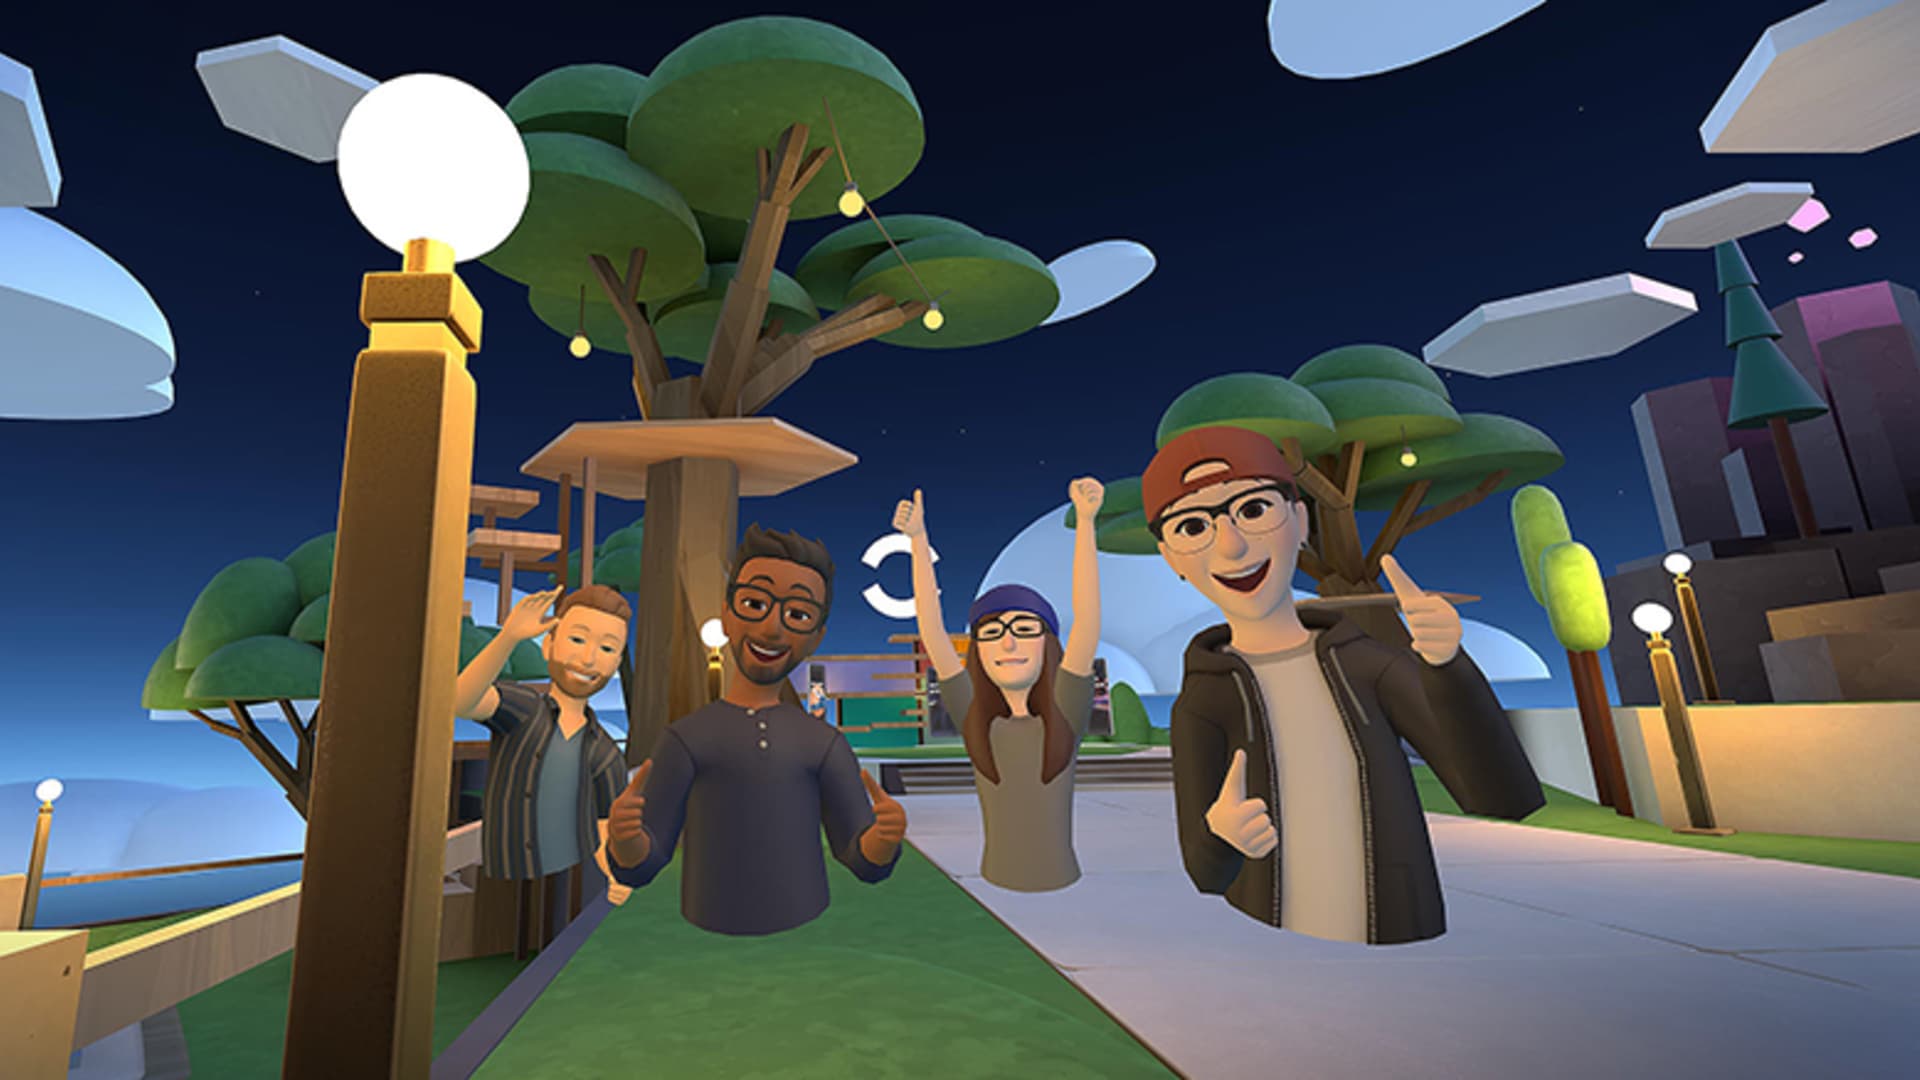 Into the Metaverse: Facebook Reality Labs Forms a New Product Team